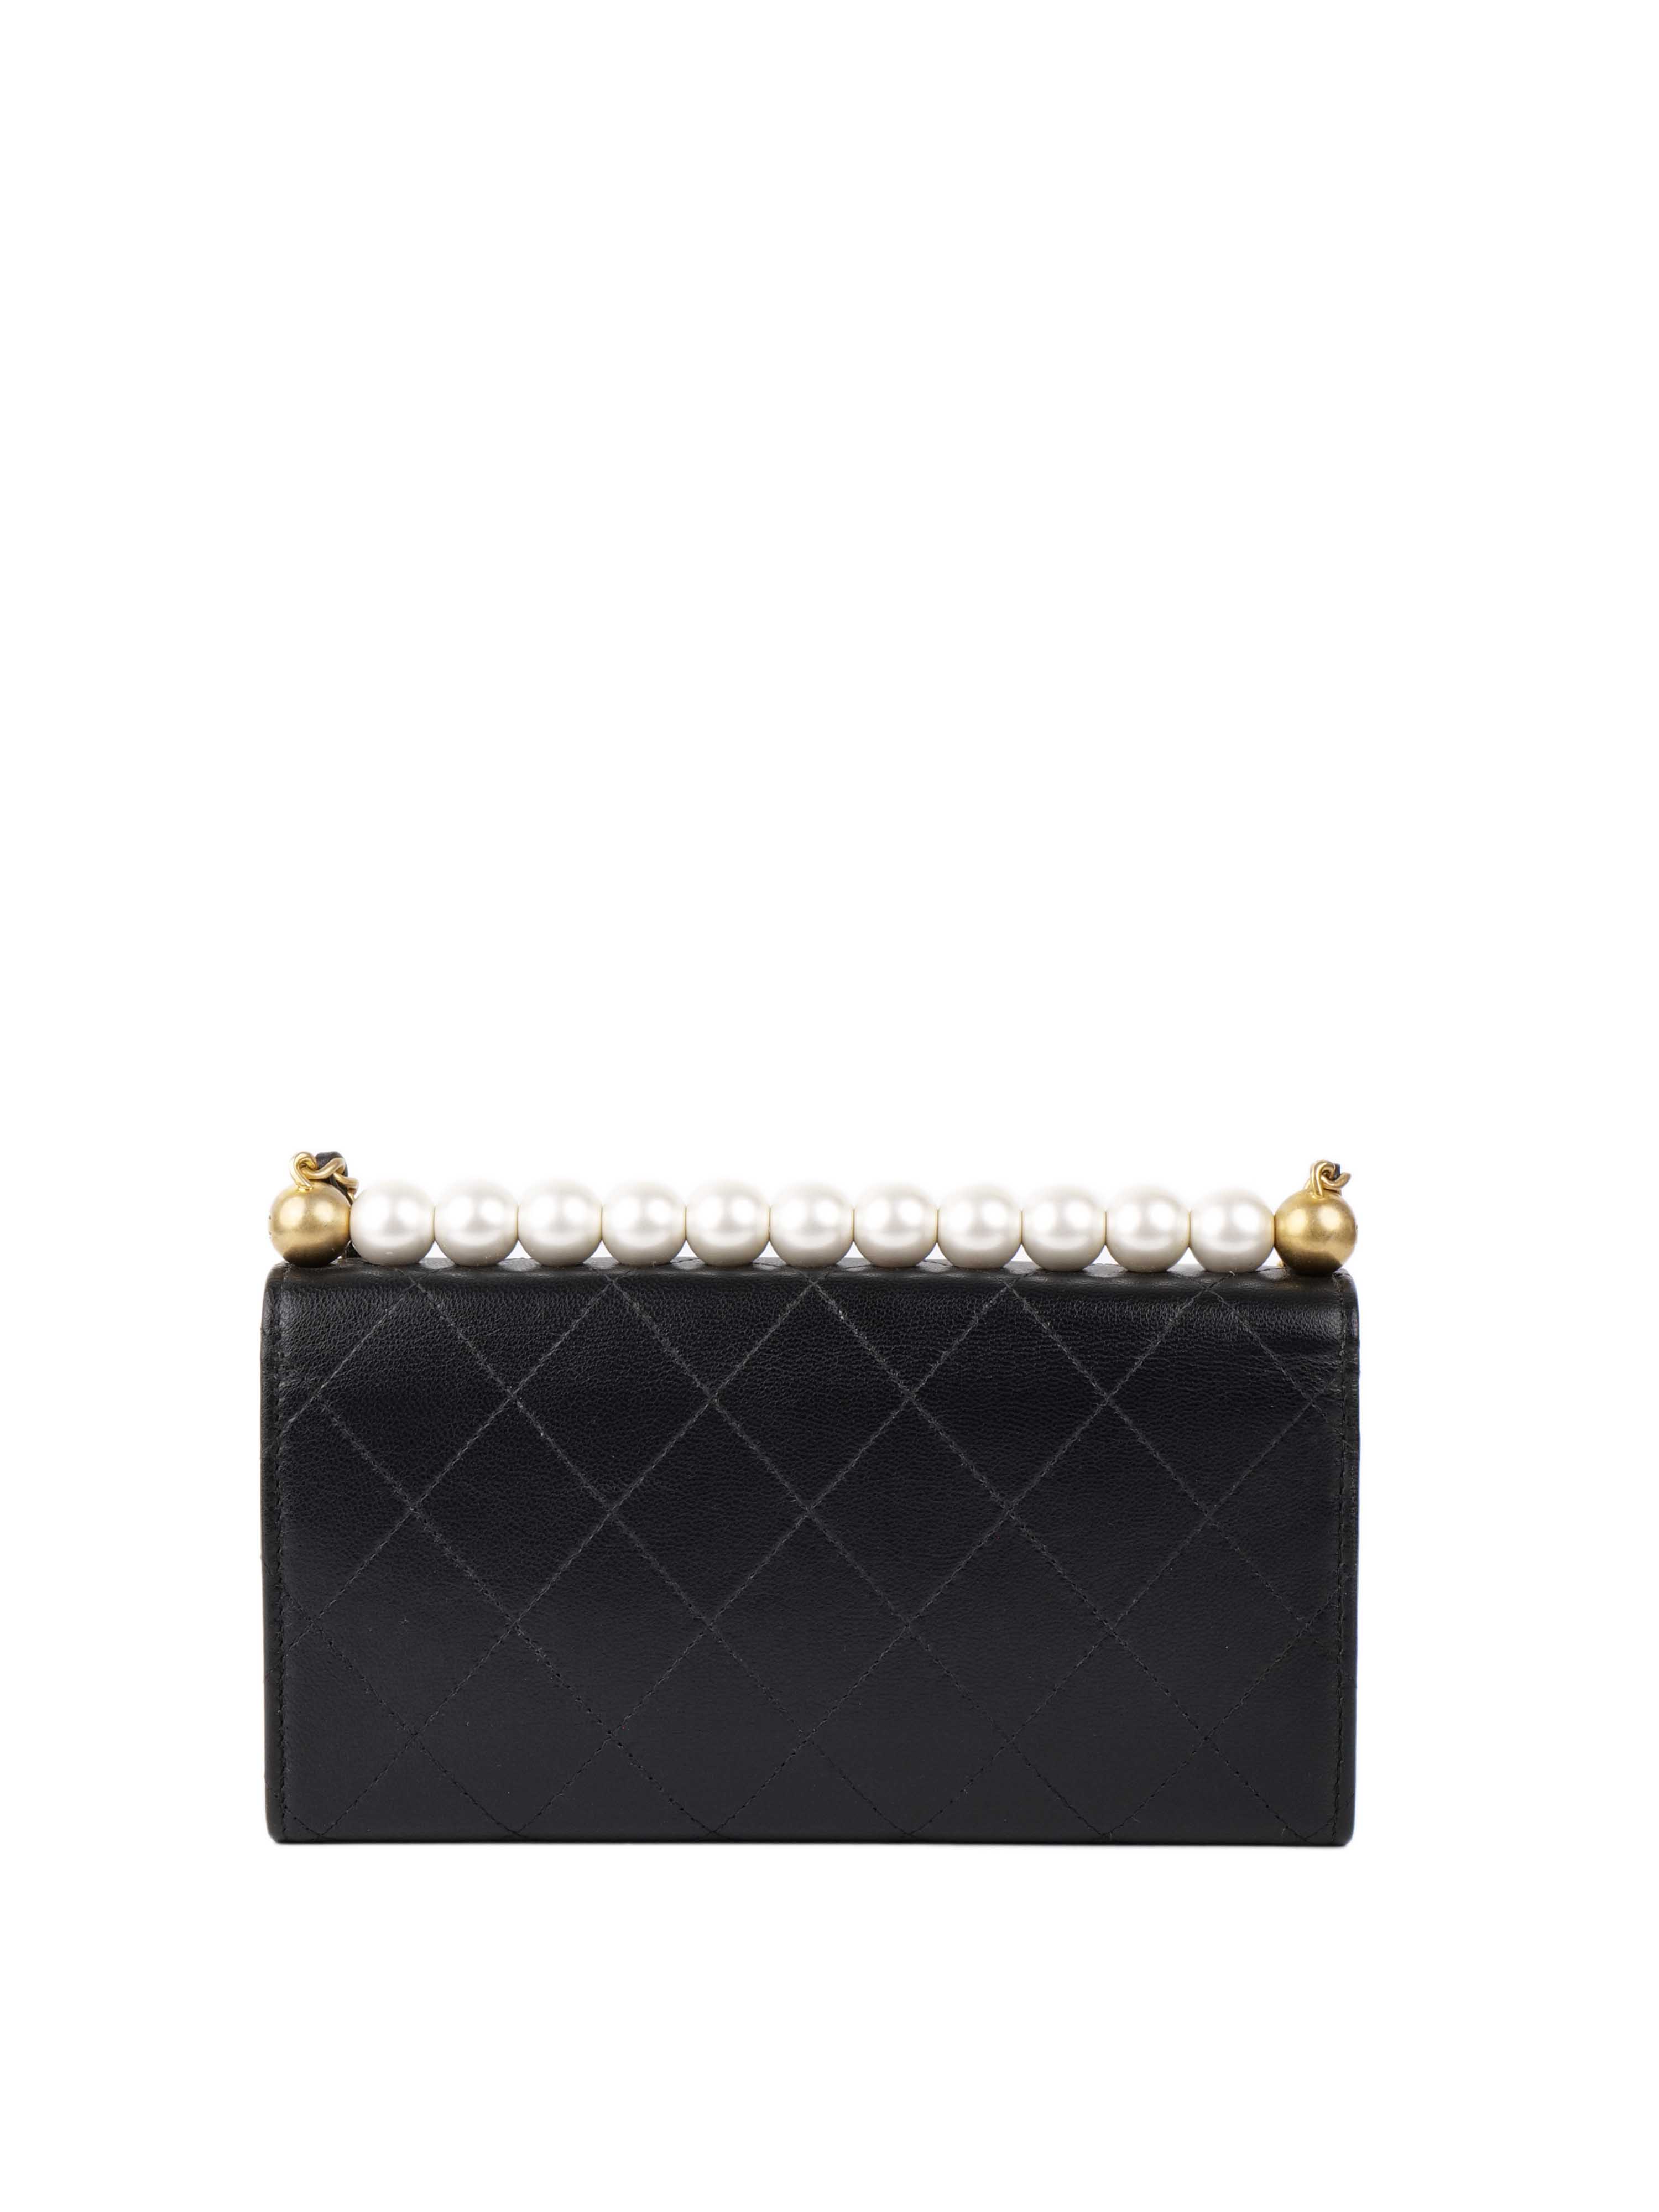 Chanel Black Wallet on Chain with Pearl Edge.